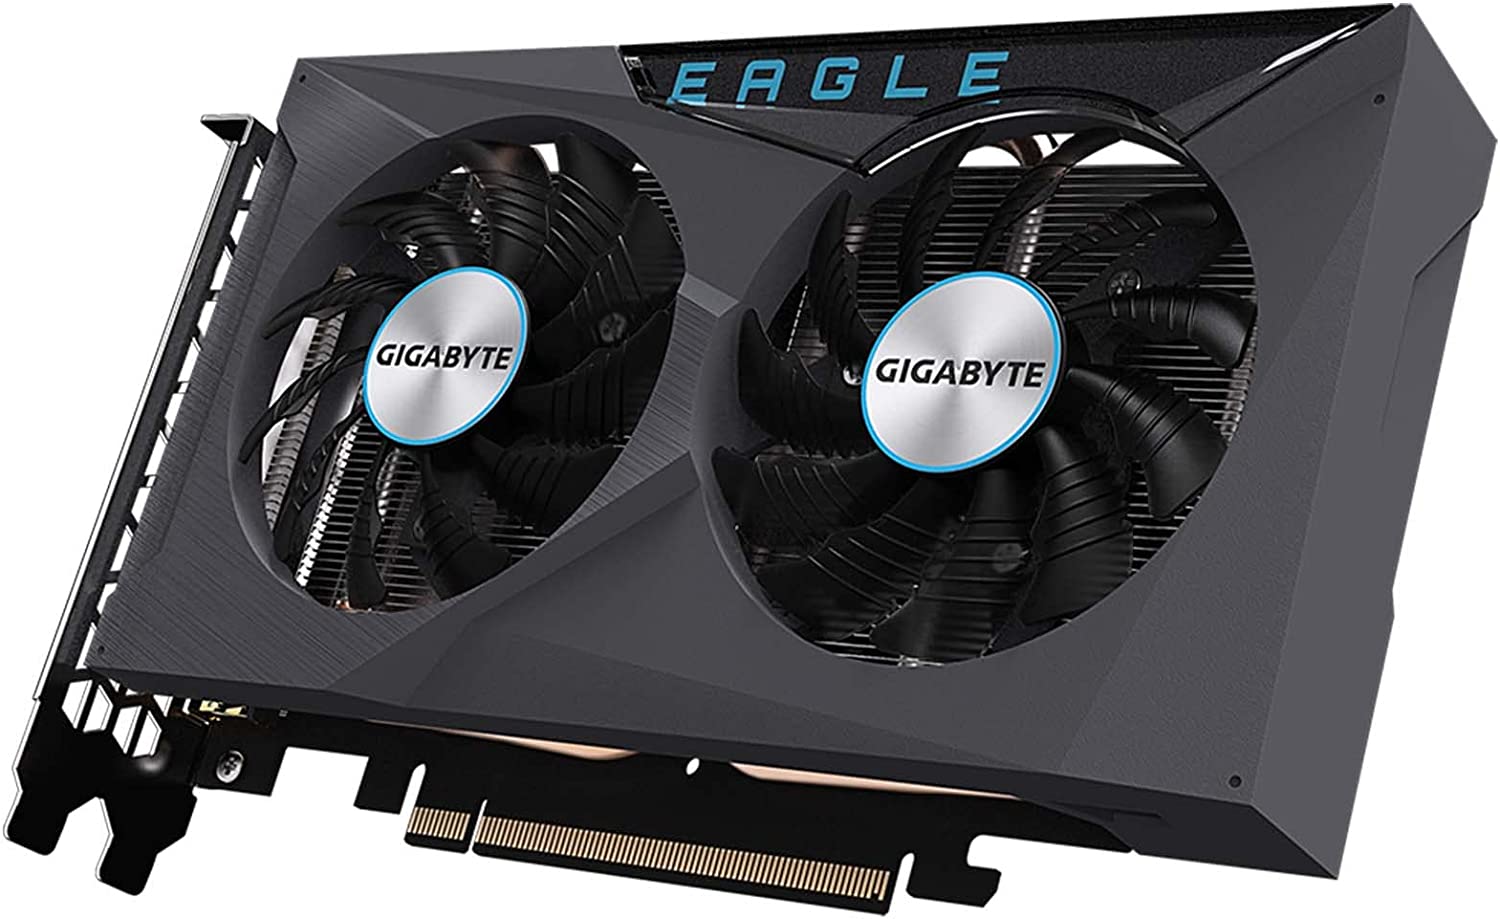 Review of the Gigabyte Radeon RX 6500 XT Eagle 4G graphics card